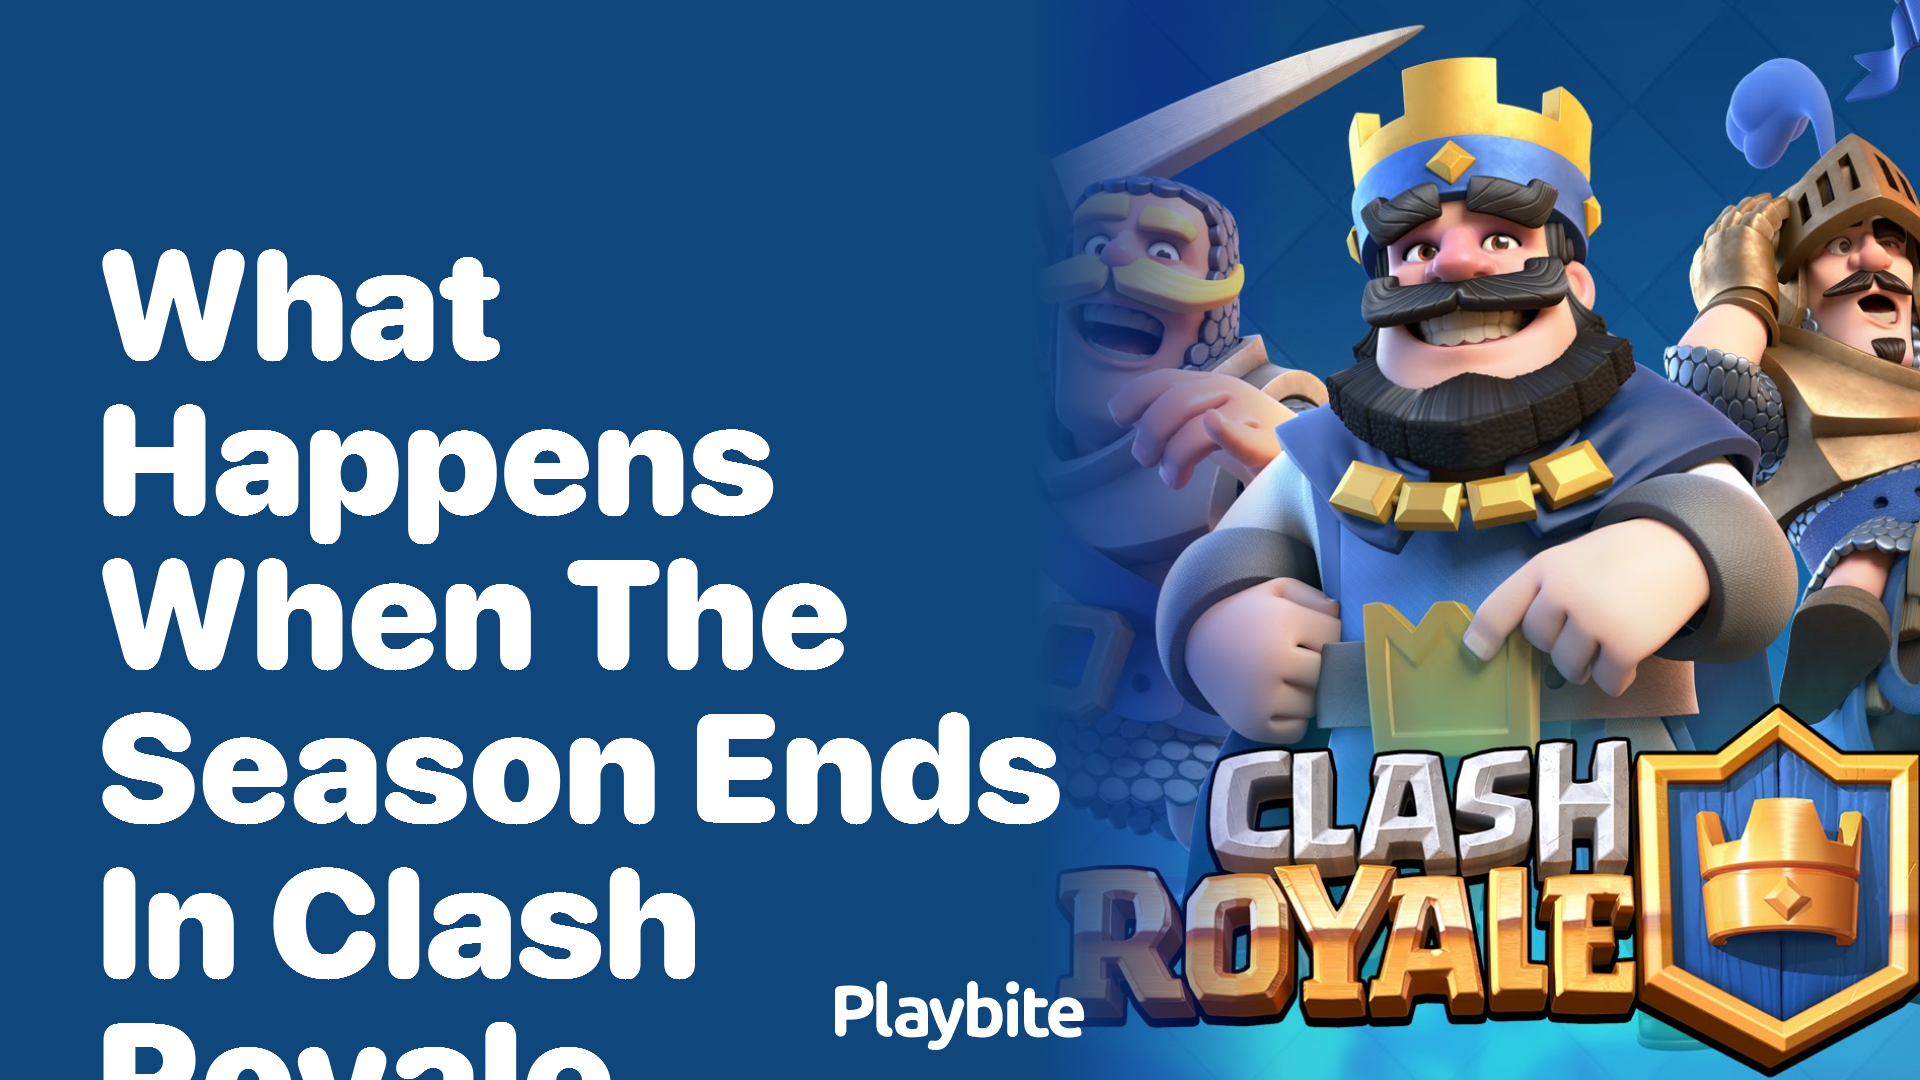 What Happens When the Season Ends in Clash Royale?